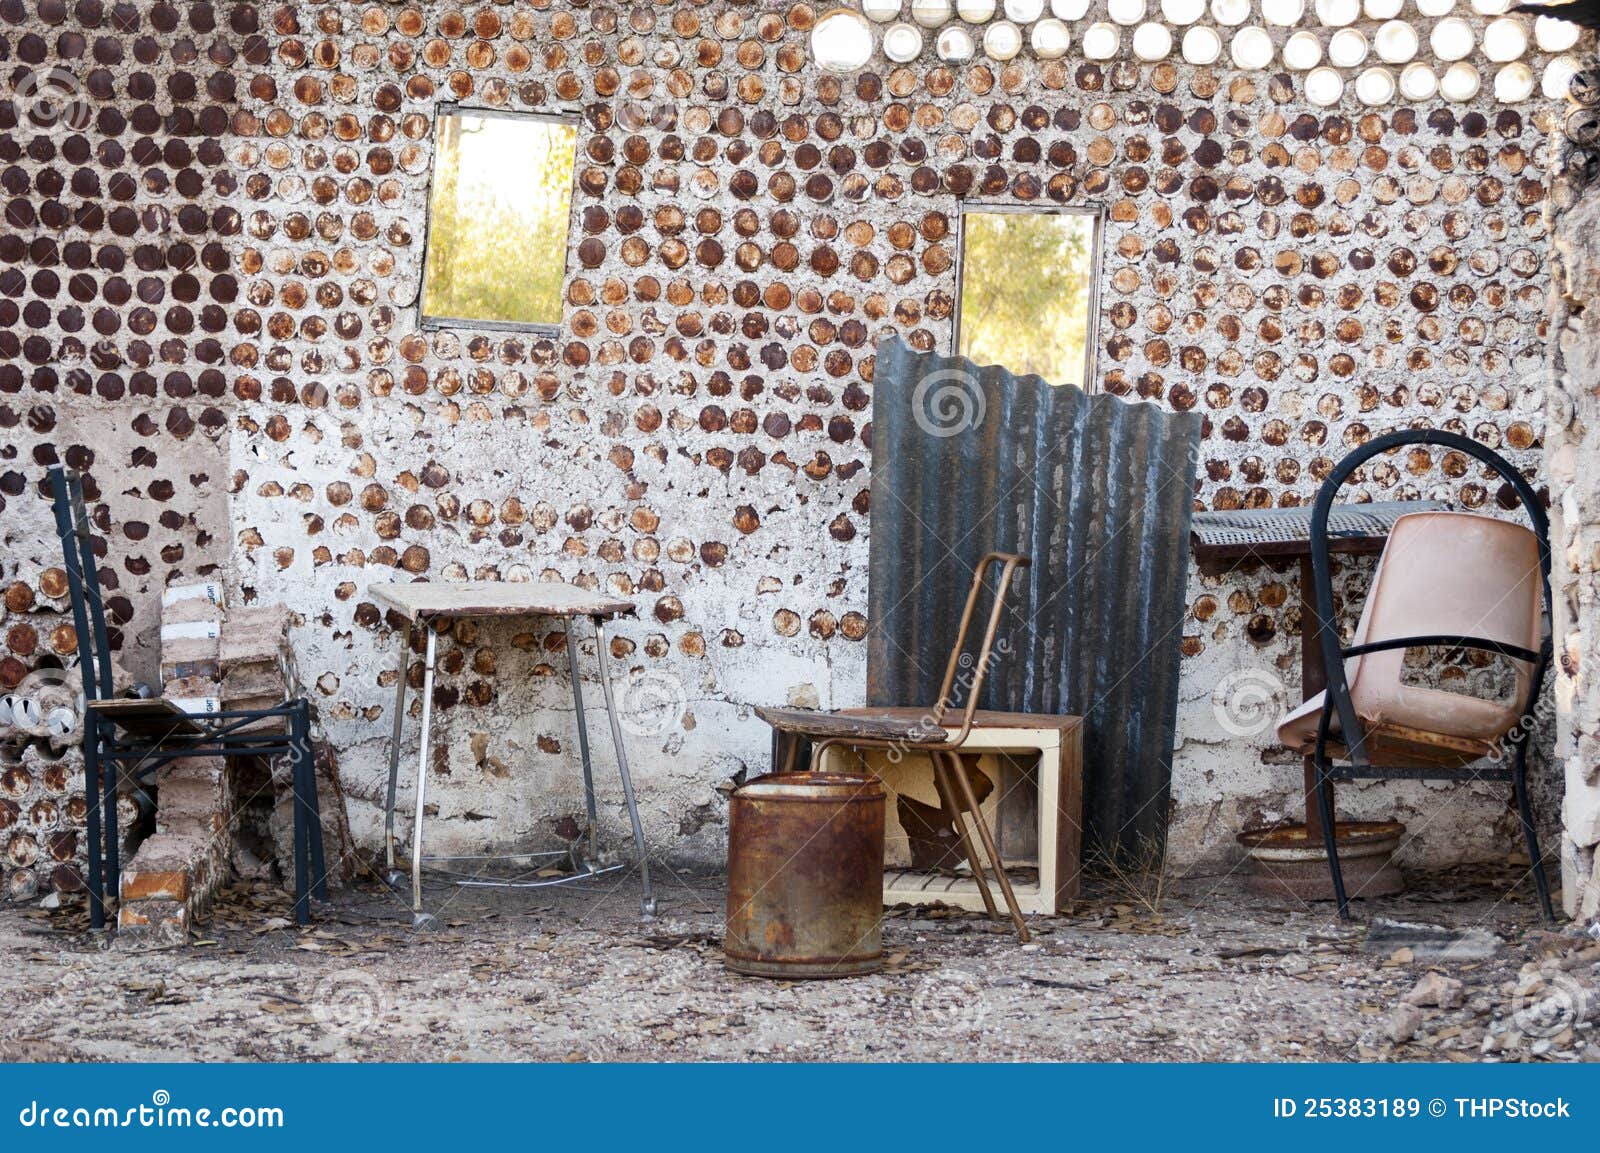 Interior of an old home built from tin cans with old furniture.